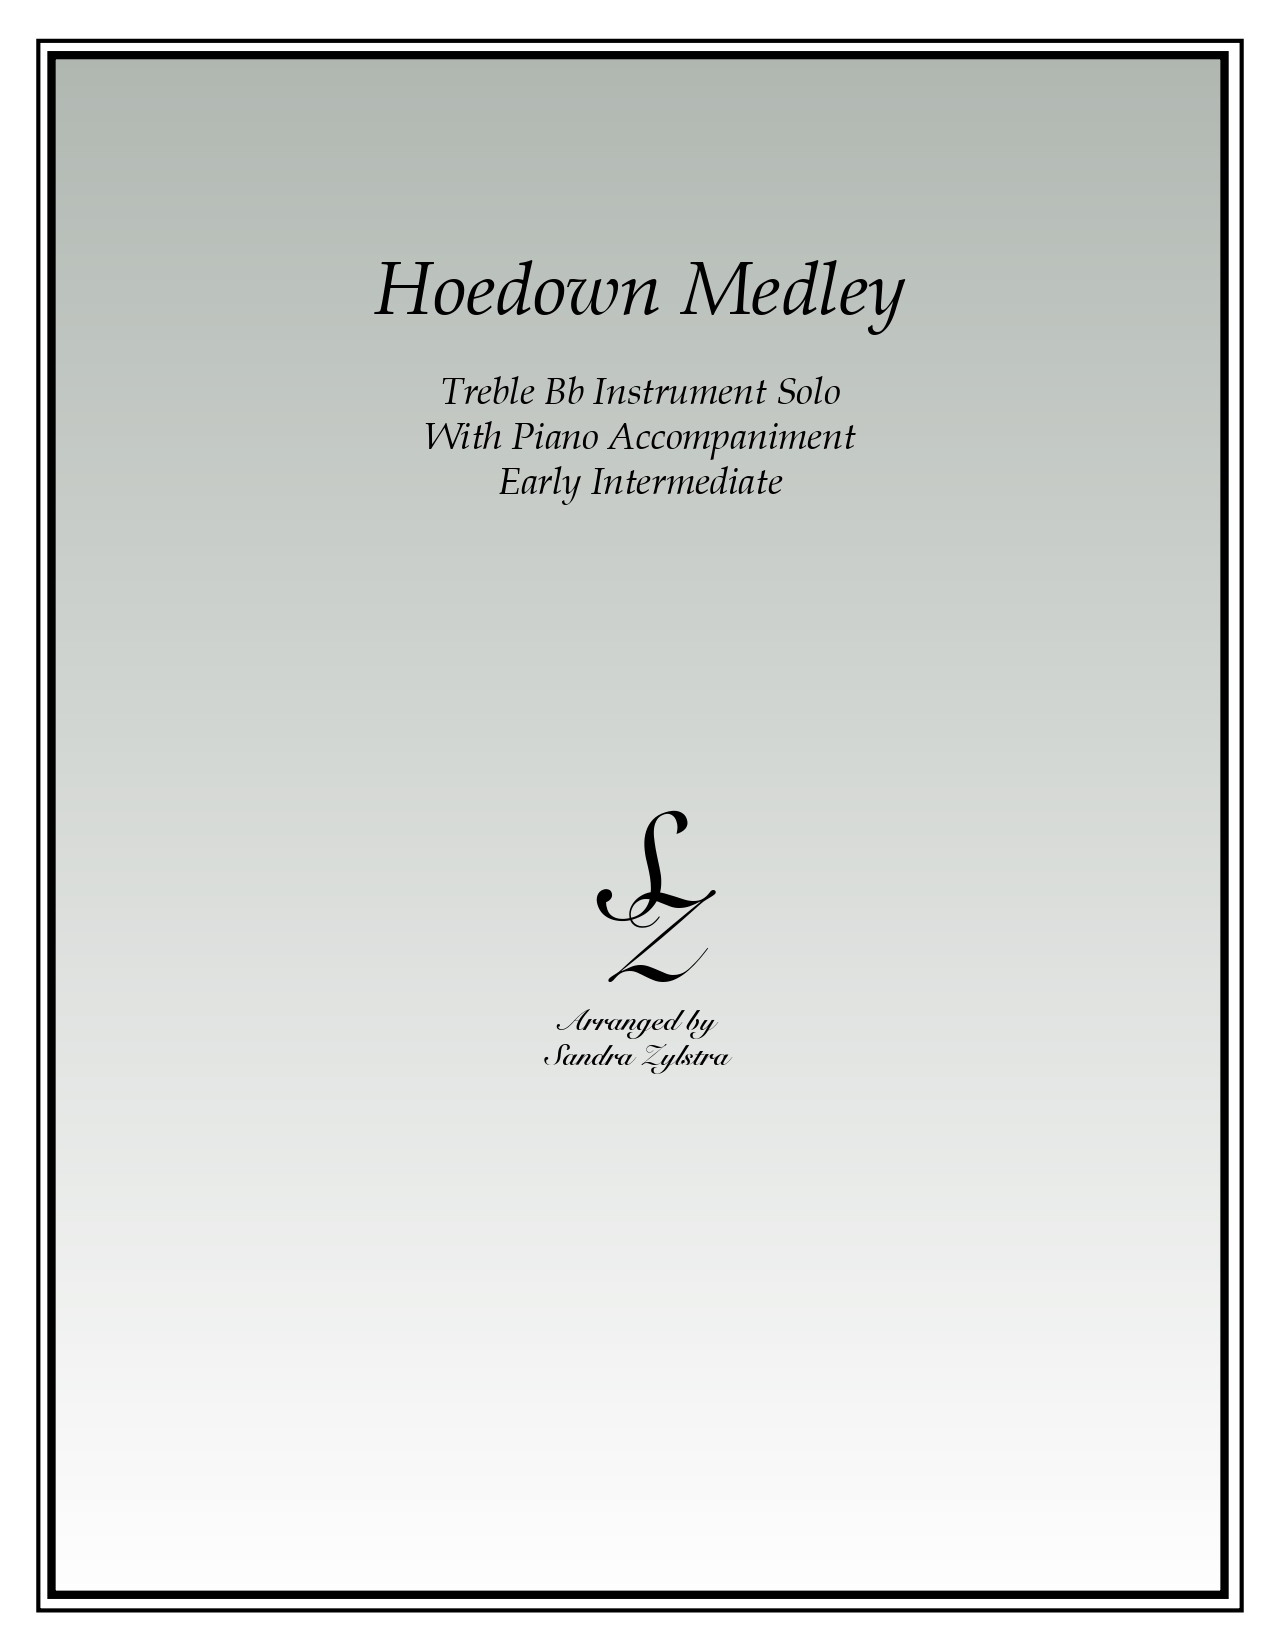 Hoedown Medley Bb instrument solo part cover page 00011